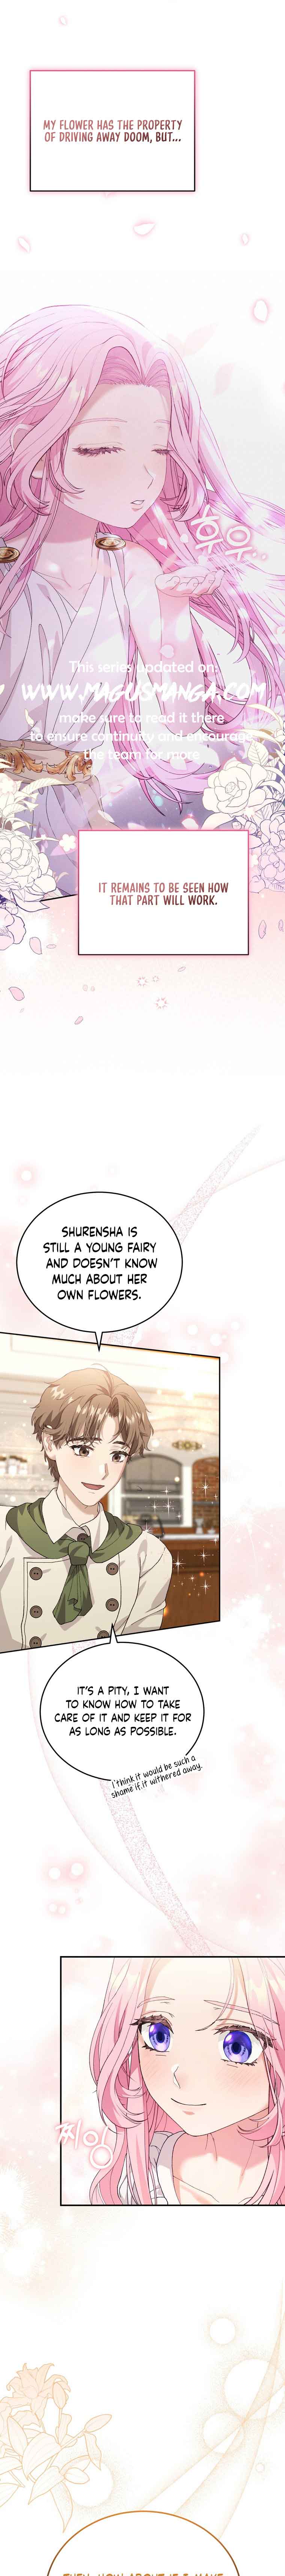 Dear Fairy, Please Contract With Me chapter 13